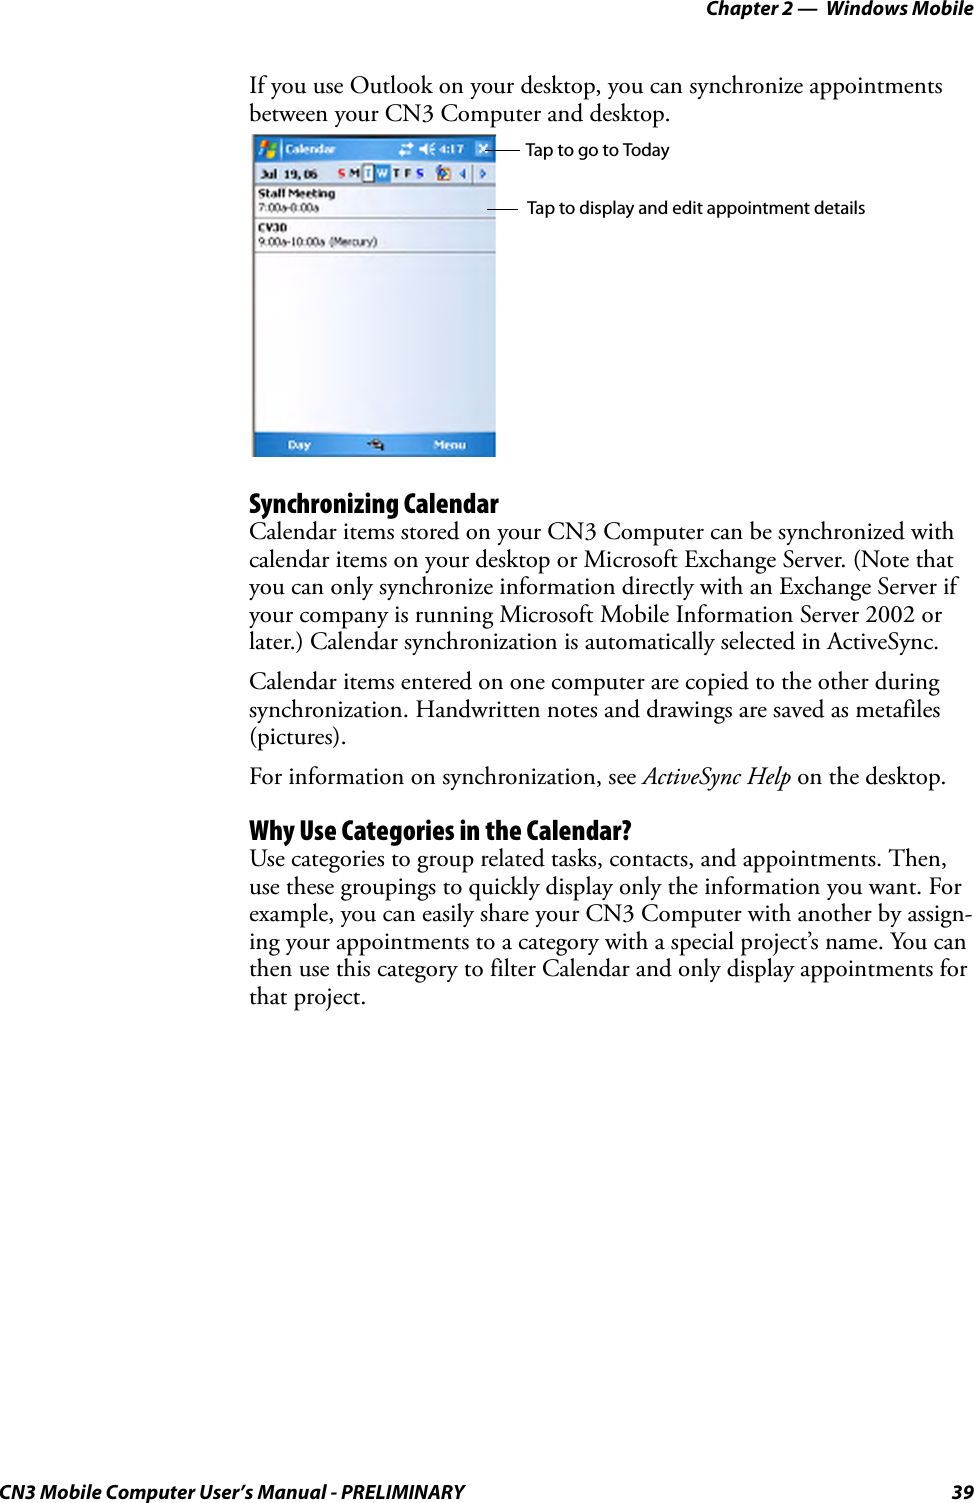 Chapter 2 —  Windows MobileCN3 Mobile Computer User’s Manual - PRELIMINARY 39If you use Outlook on your desktop, you can synchronize appointments between your CN3 Computer and desktop.Synchronizing CalendarCalendar items stored on your CN3 Computer can be synchronized with calendar items on your desktop or Microsoft Exchange Server. (Note that you can only synchronize information directly with an Exchange Server if your company is running Microsoft Mobile Information Server 2002 or later.) Calendar synchronization is automatically selected in ActiveSync.Calendar items entered on one computer are copied to the other during synchronization. Handwritten notes and drawings are saved as metafiles (pictures).For information on synchronization, see ActiveSync Help on the desktop.Why Use Categories in the Calendar?Use categories to group related tasks, contacts, and appointments. Then, use these groupings to quickly display only the information you want. For example, you can easily share your CN3 Computer with another by assign-ing your appointments to a category with a special project’s name. You can then use this category to filter Calendar and only display appointments for that project.Tap to go to TodayTap to display and edit appointment details